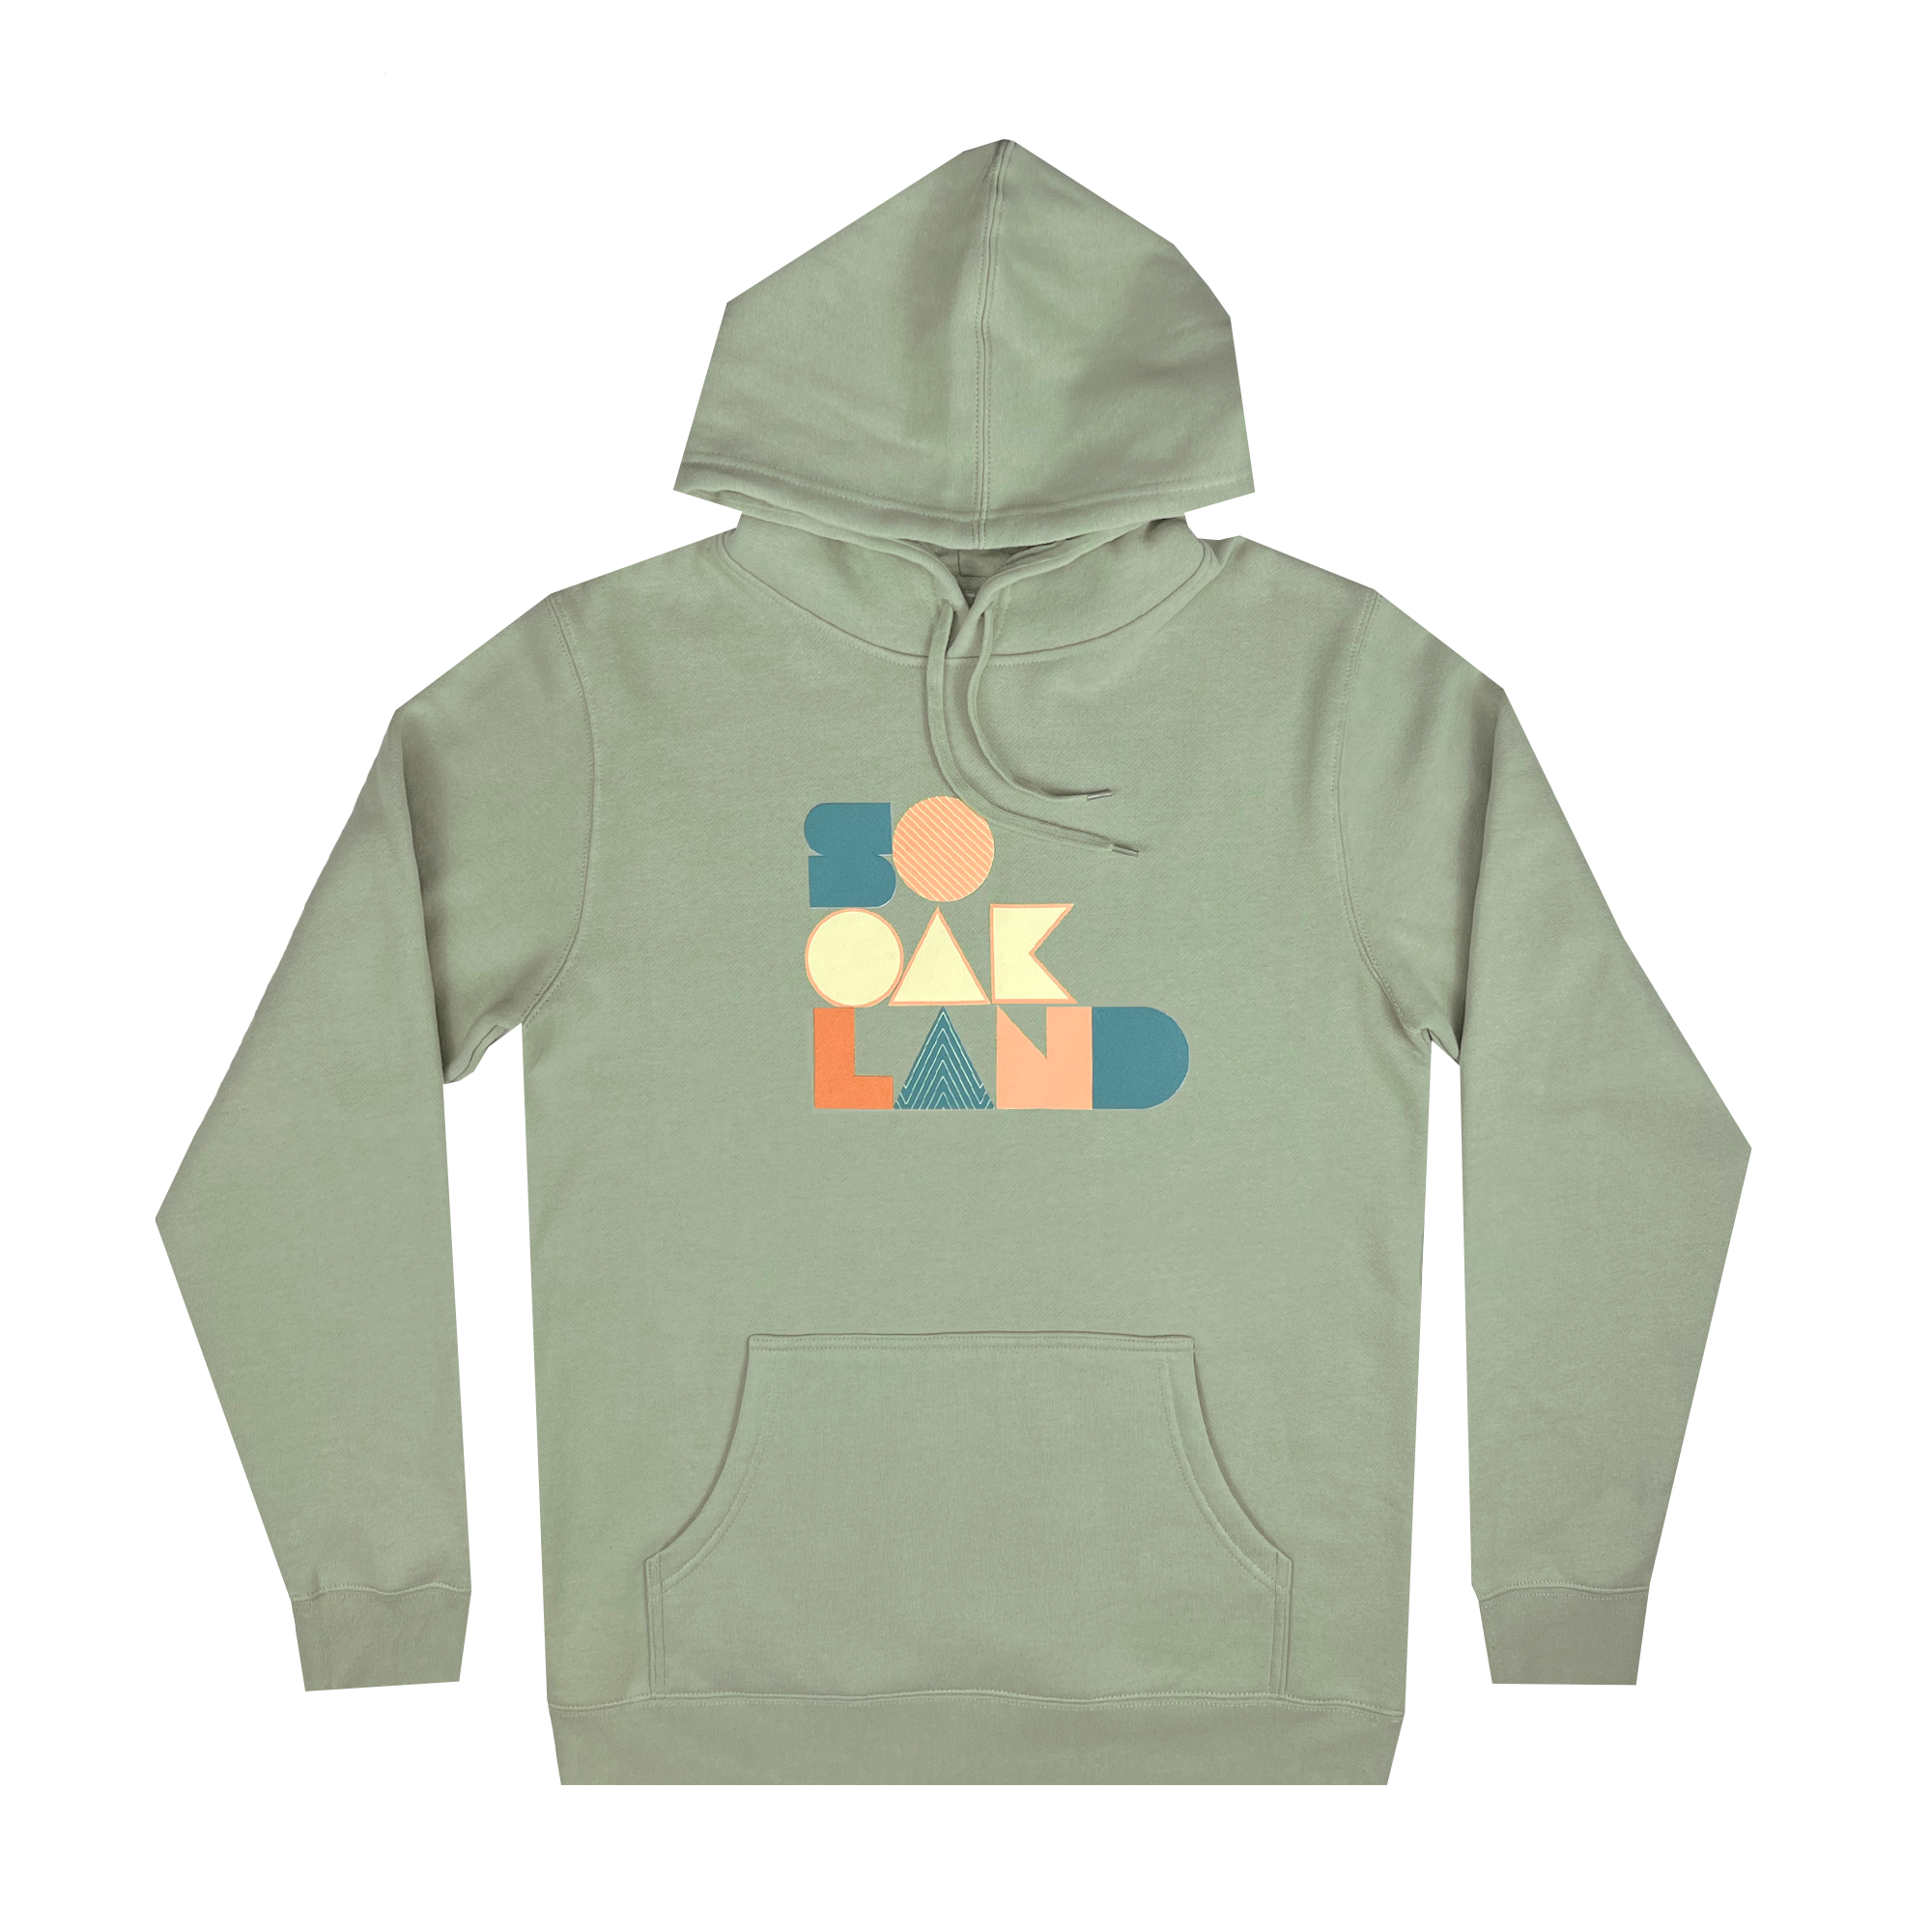 Pistachio pullover hoodie with large multi-color SOOAKLAND graphic wordmark on the back.